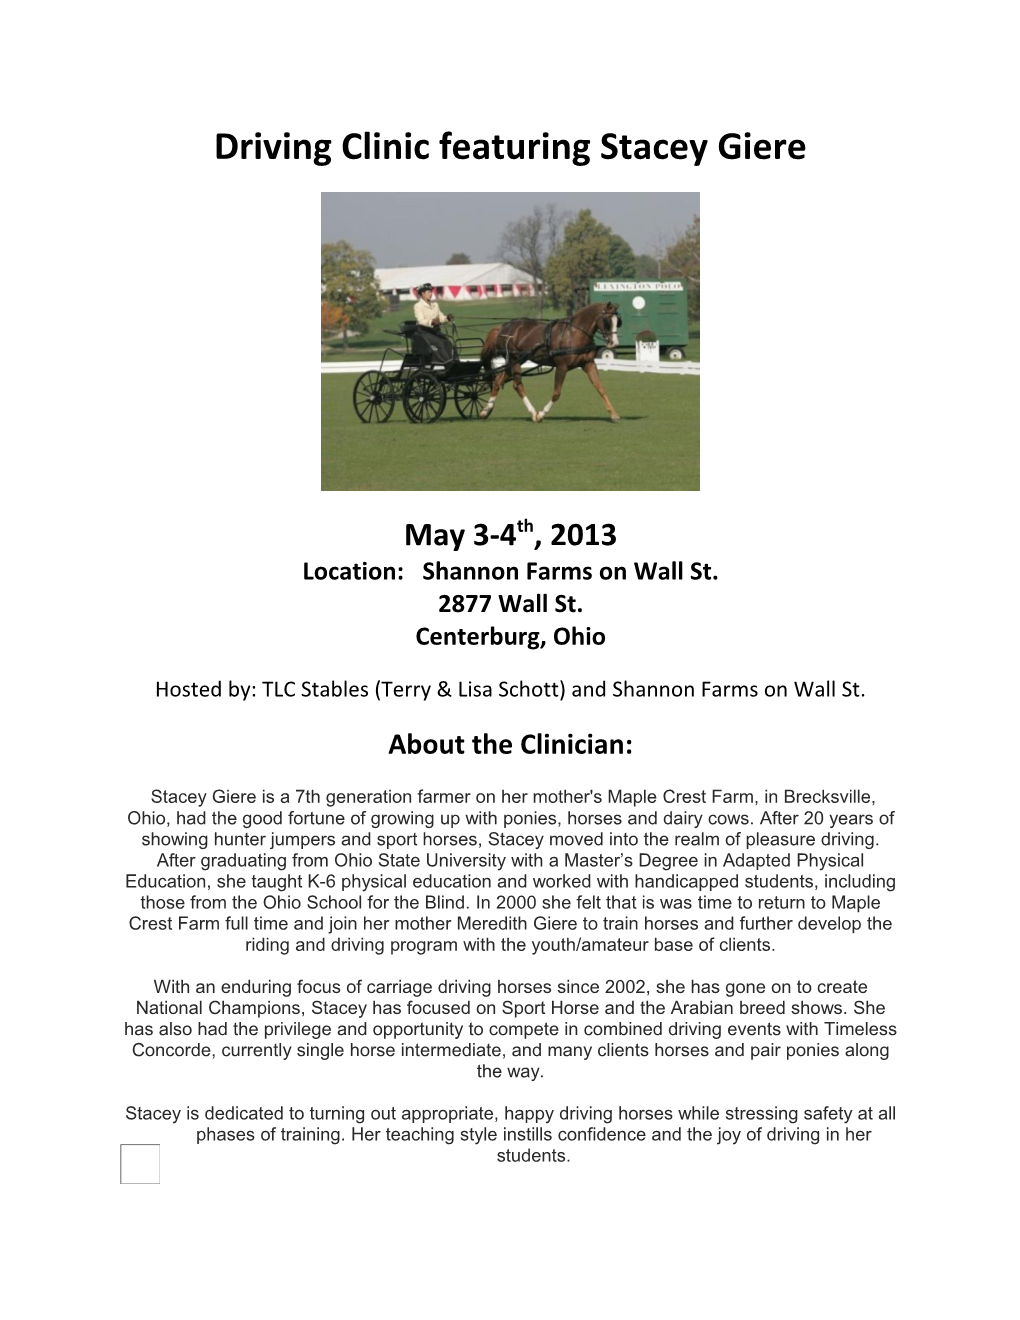 Driving Clinic Featuring Stacey Giere